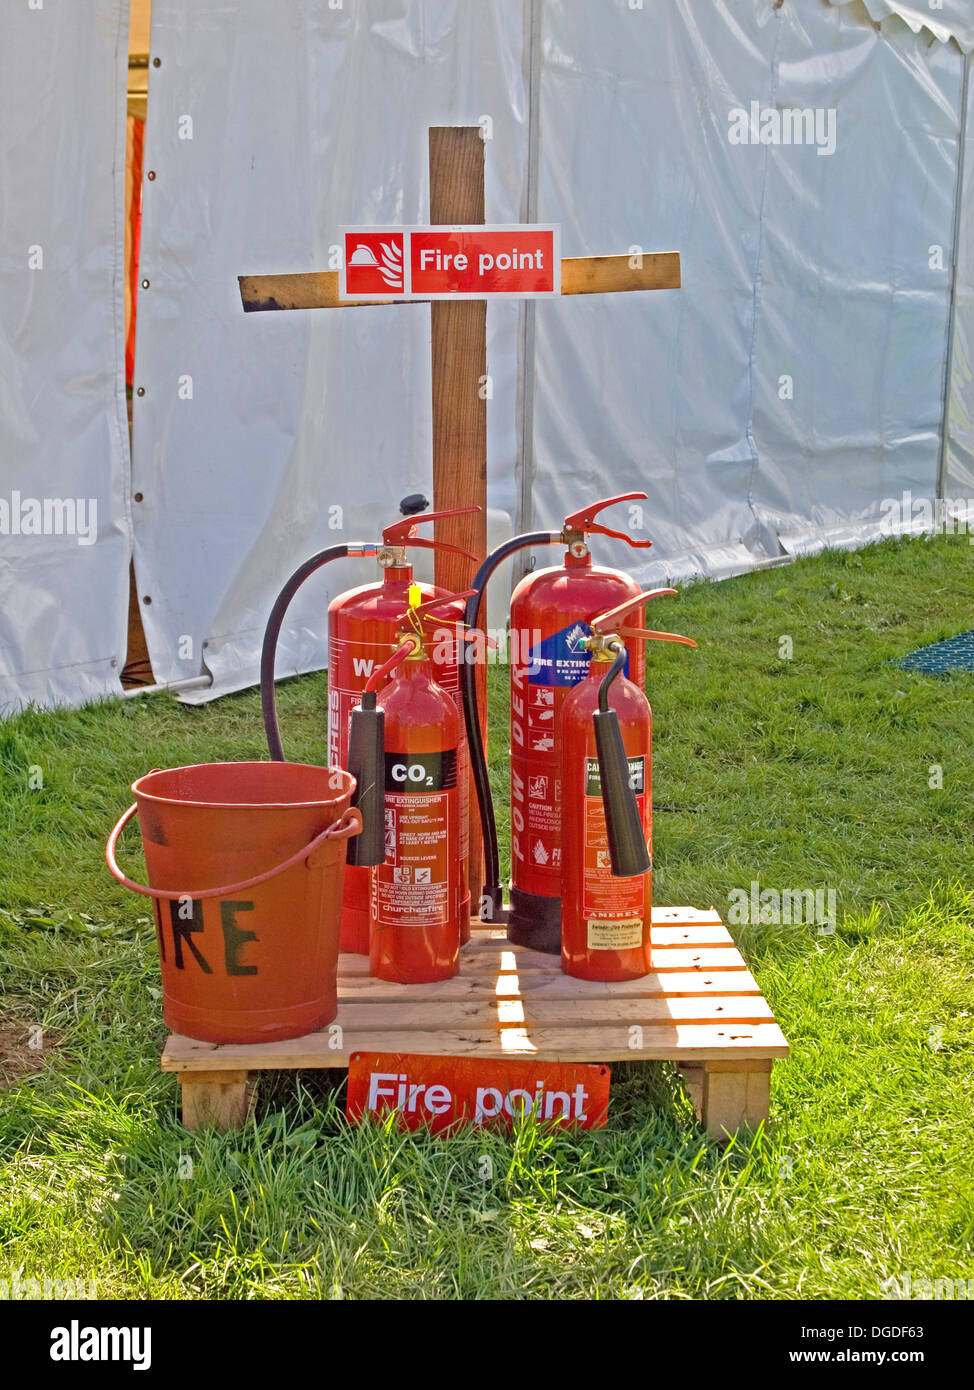 fire point at small country fair Stock Photo